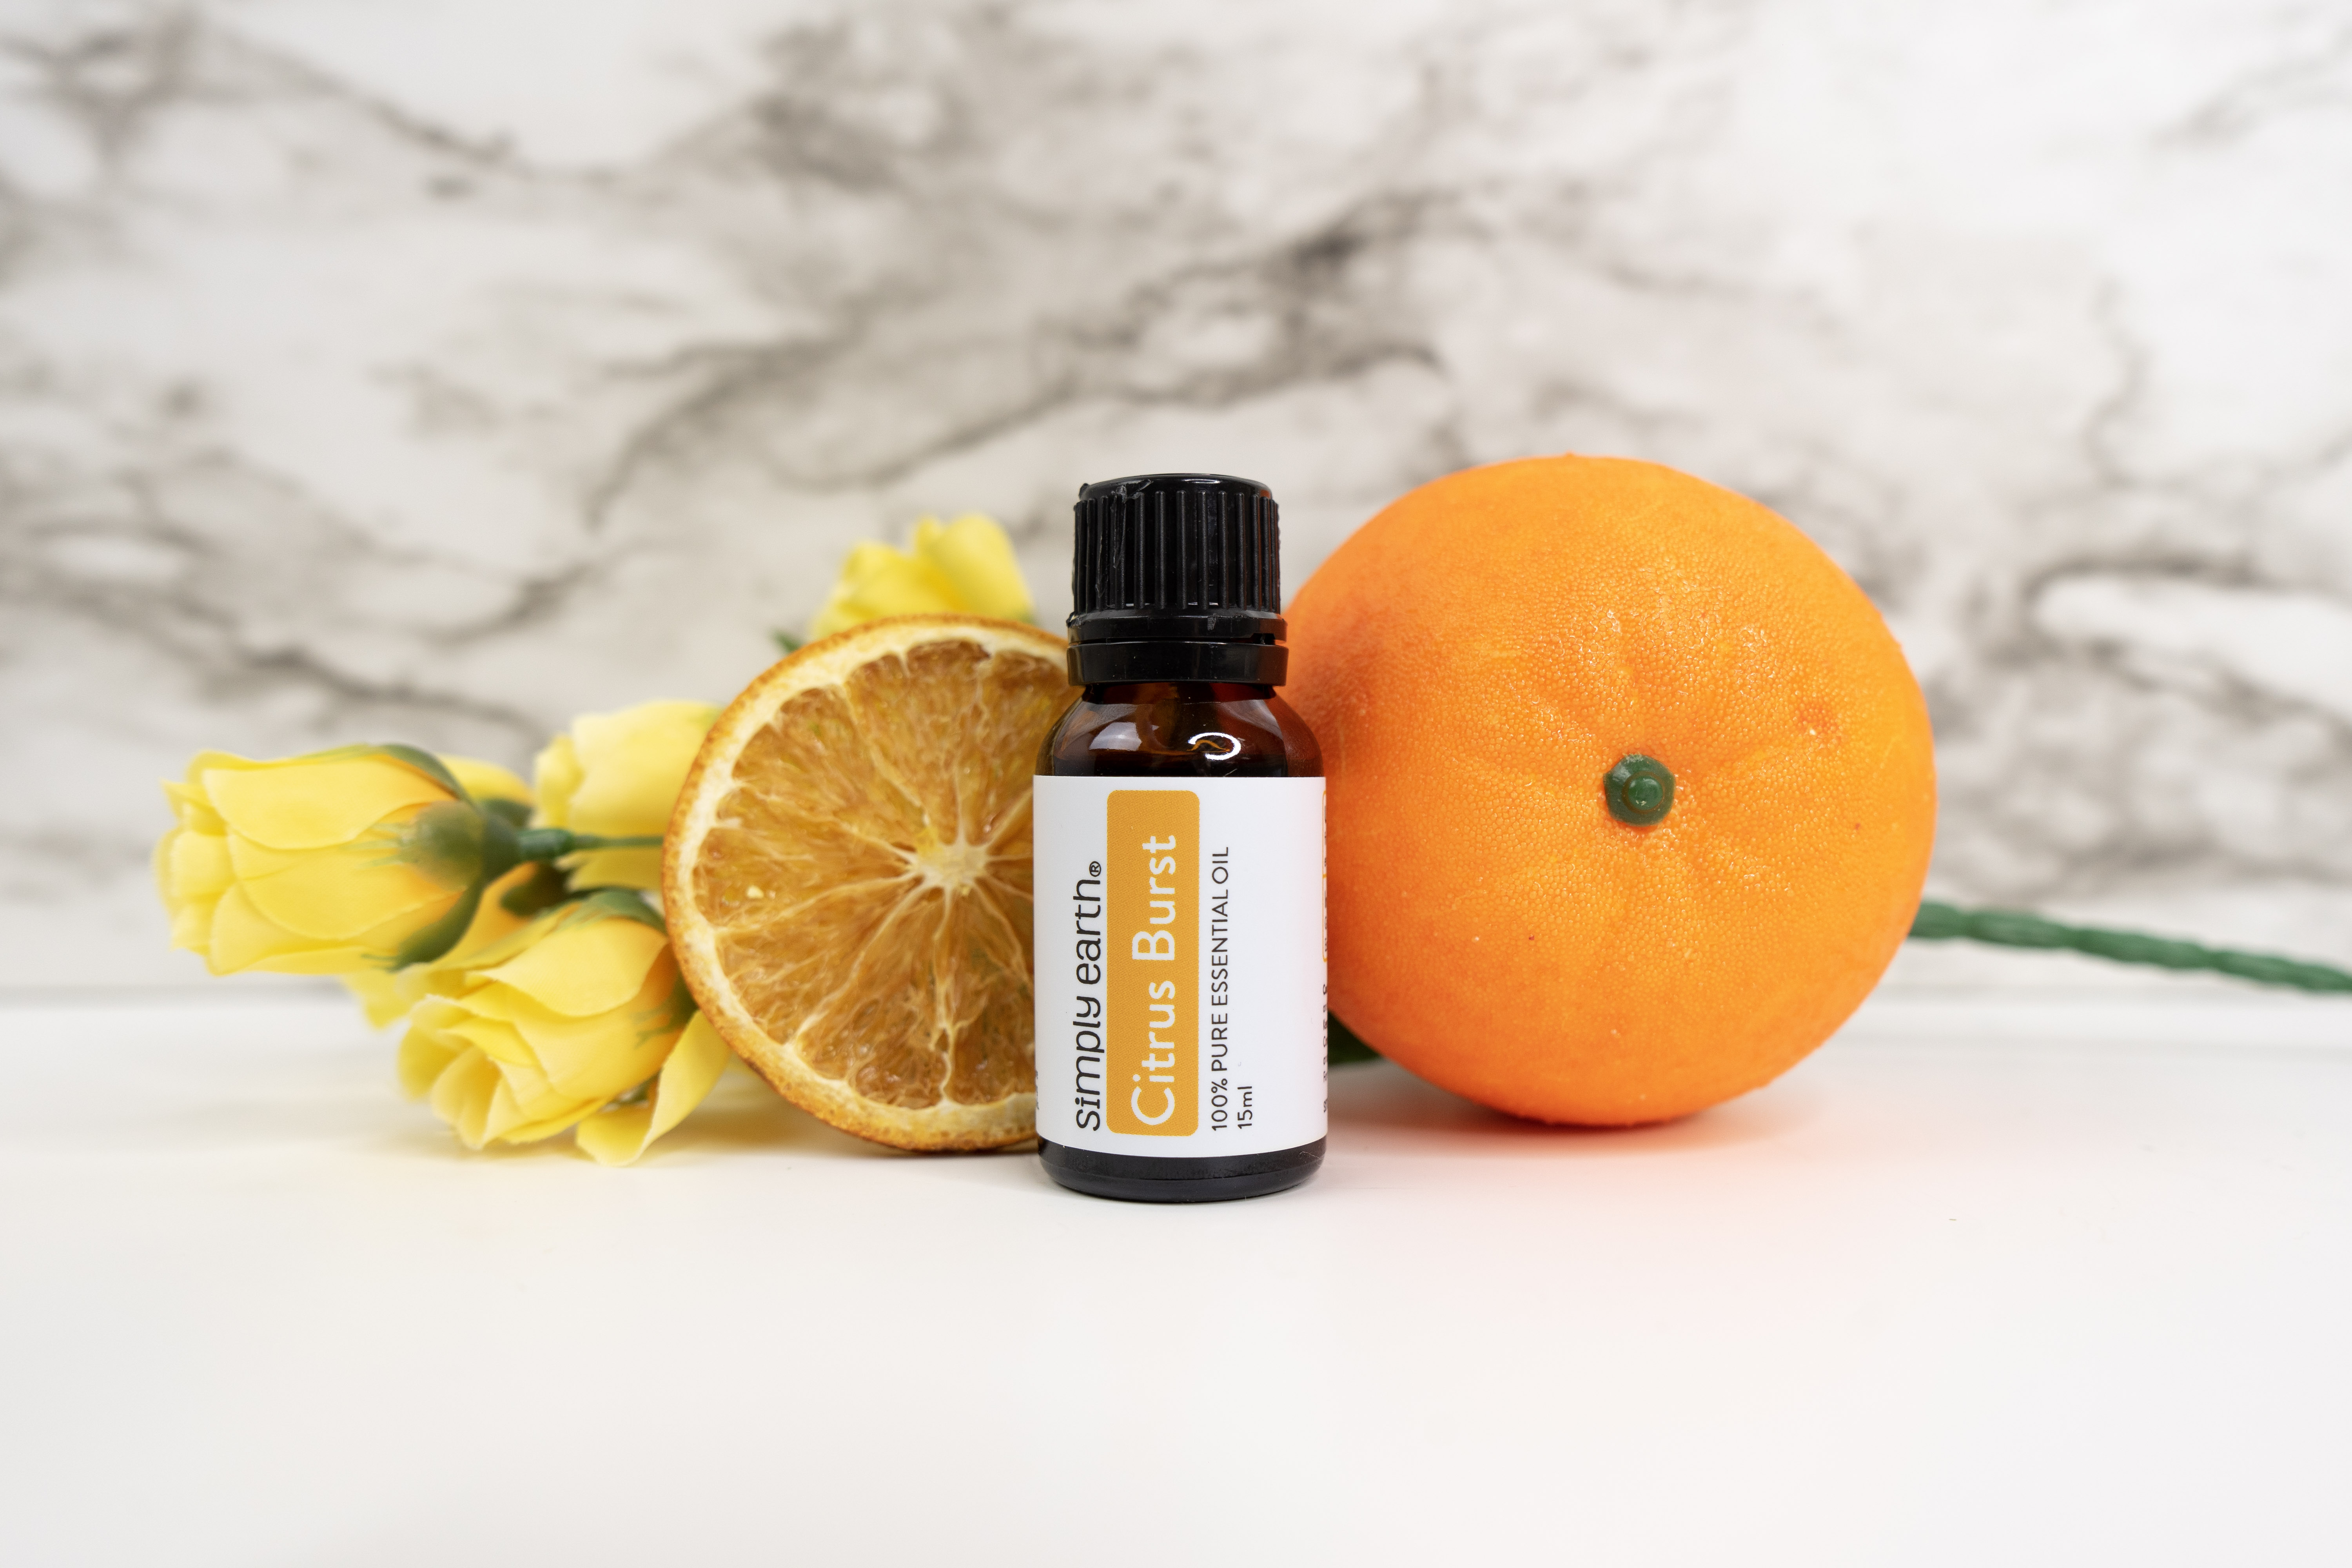 5 Best Citrus Essential Oils You Shouldn't Miss - Simply Earth Blog